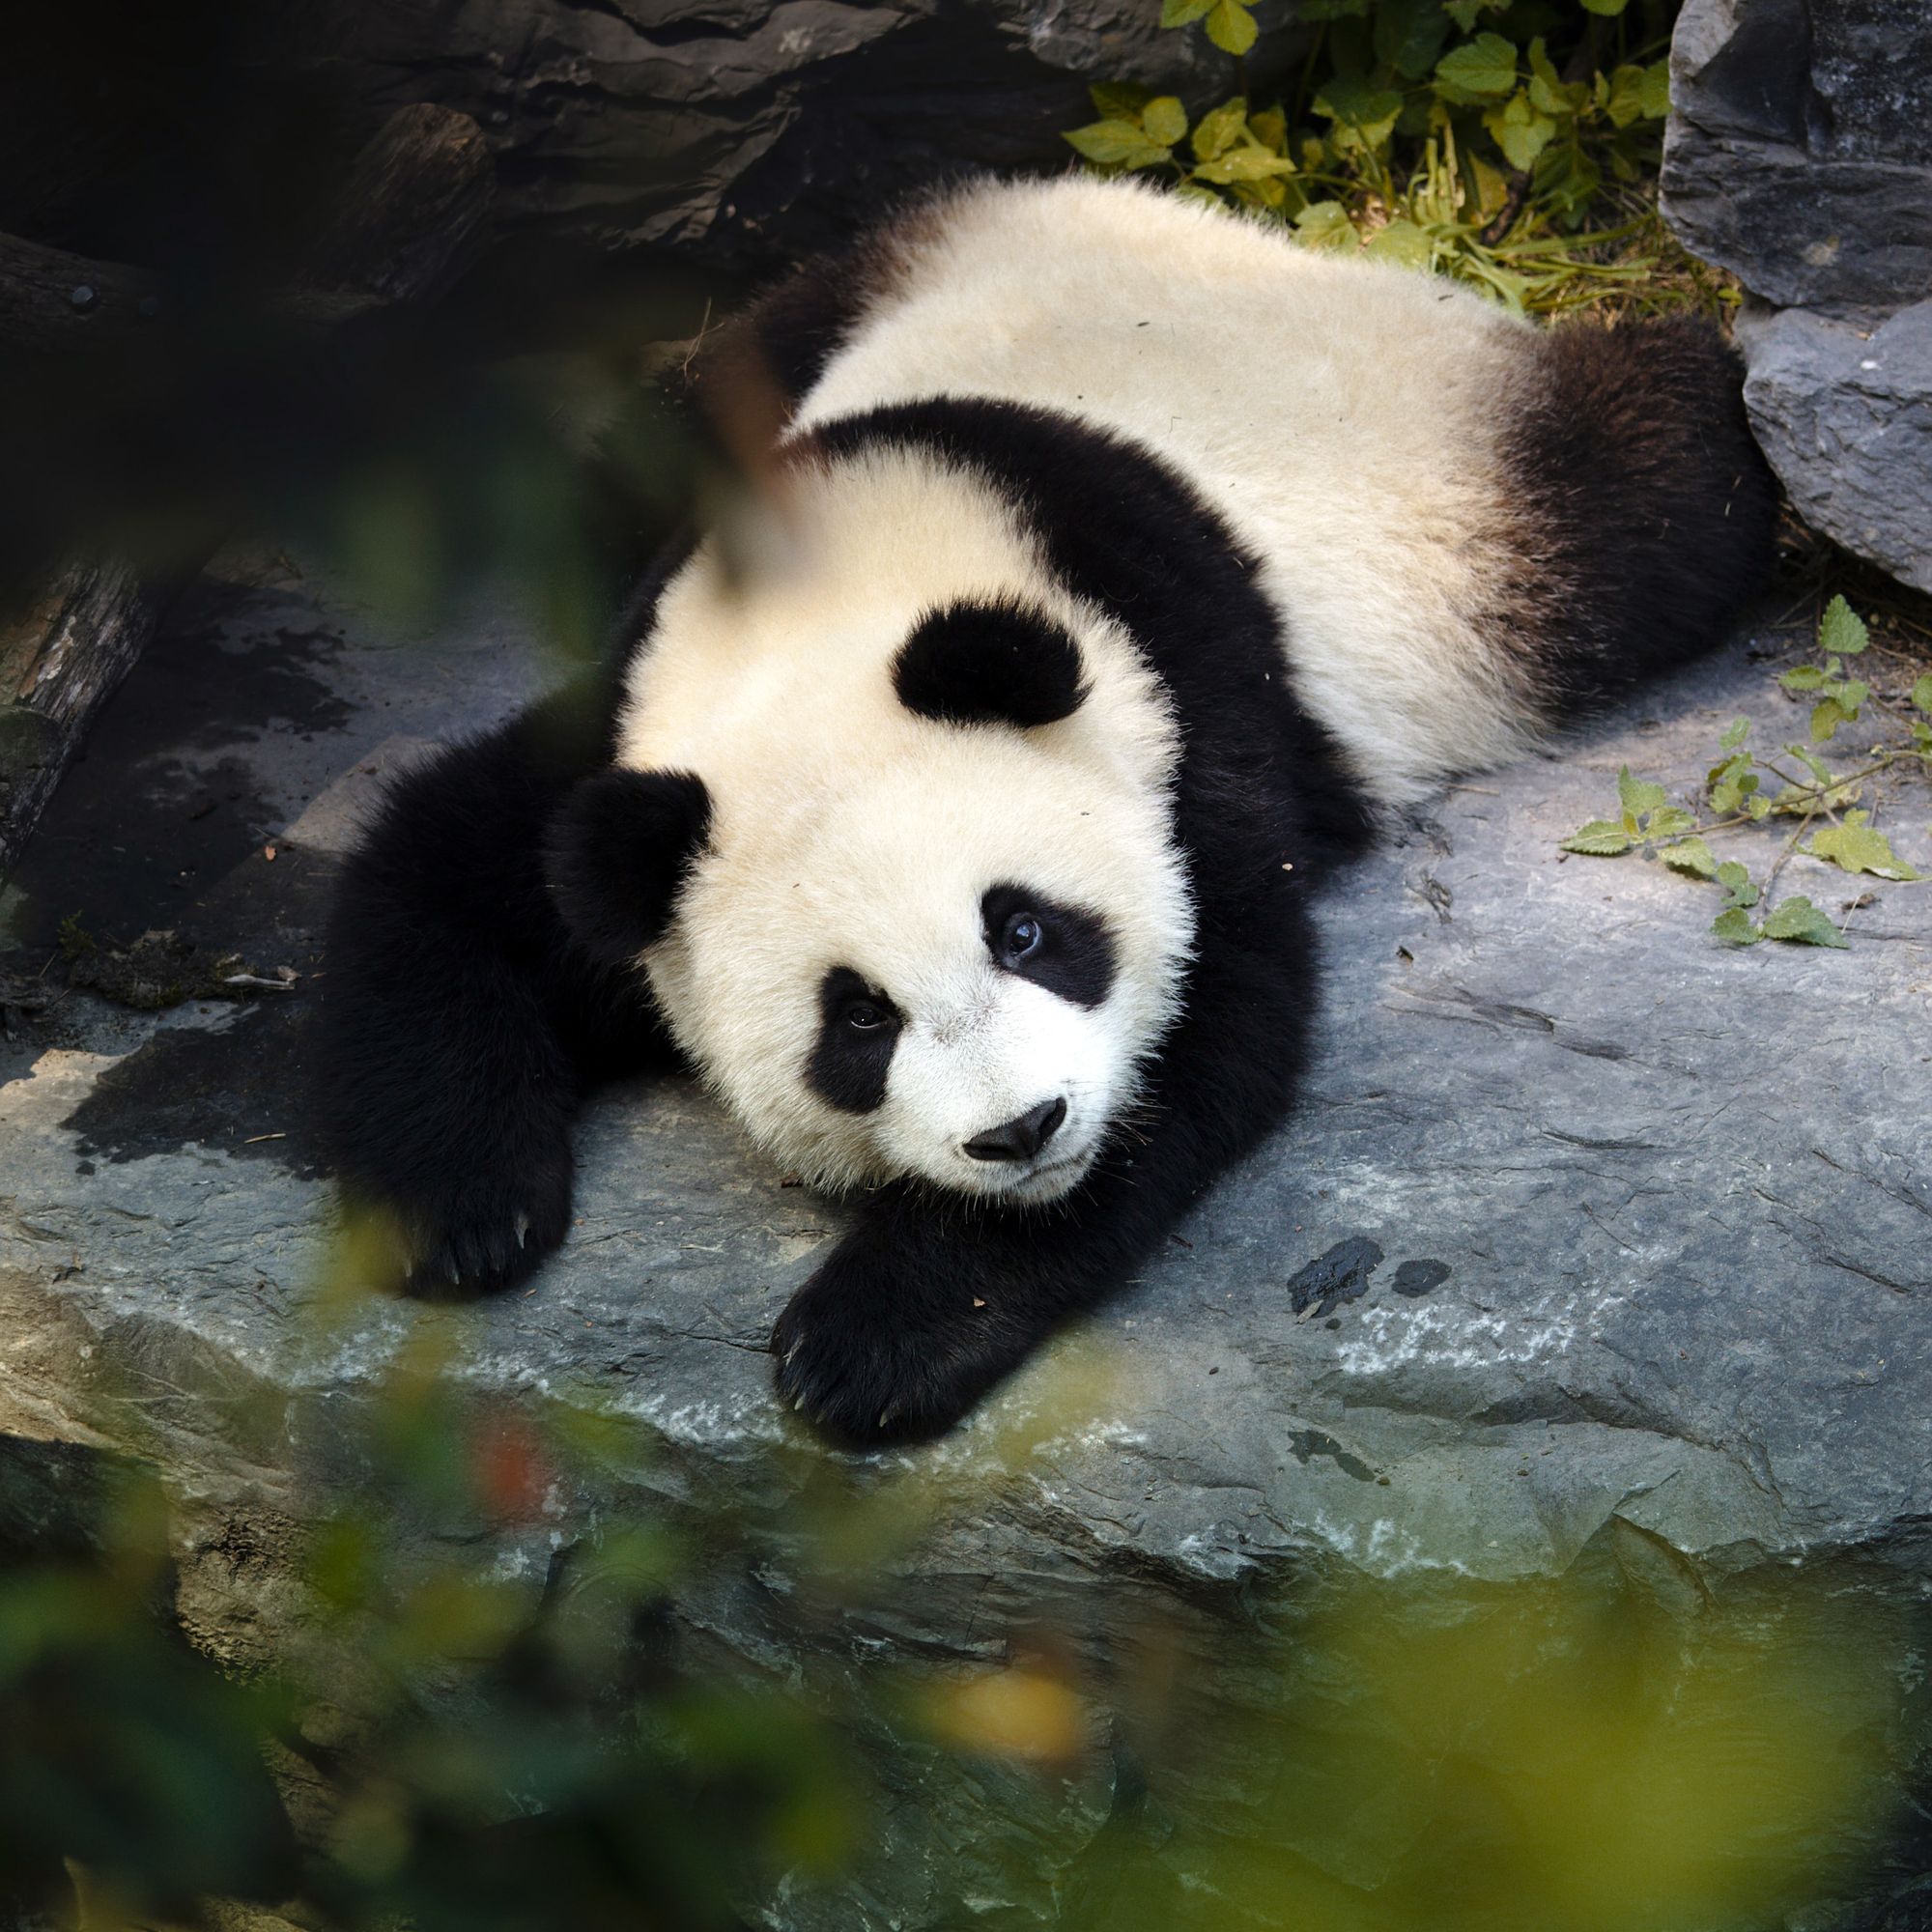 A panda lying on a rock, looking up at the camera.